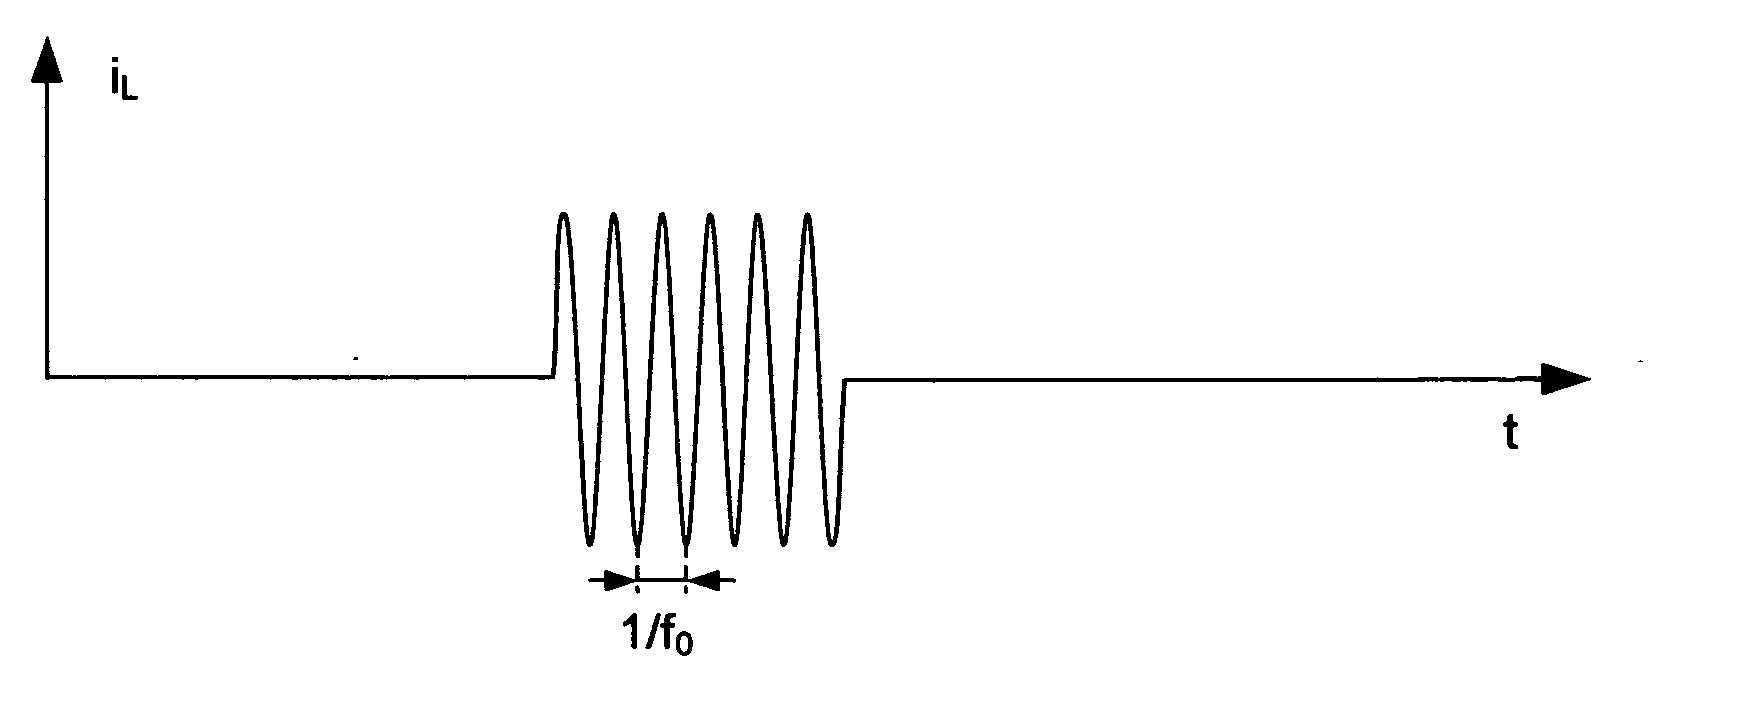 Tubular capacitor with variable capacitance and dielectrically elongated inner electrode for NMR applications